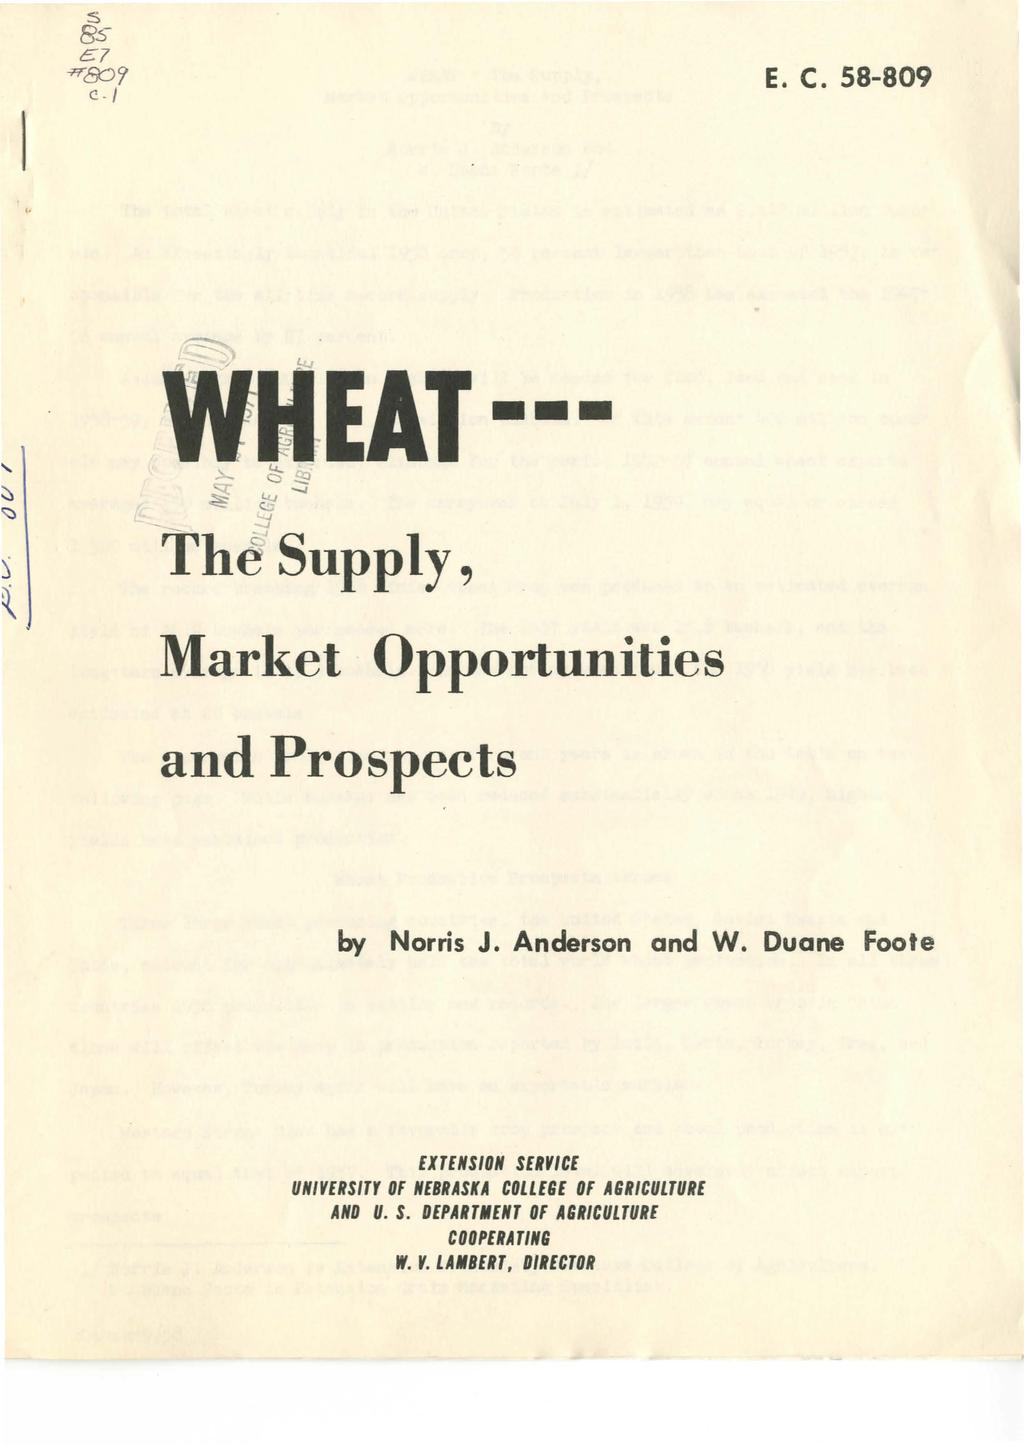 E. C. 58-809 The Supply., Market Opportunities and Prospects by Norris J. Anderson and W.